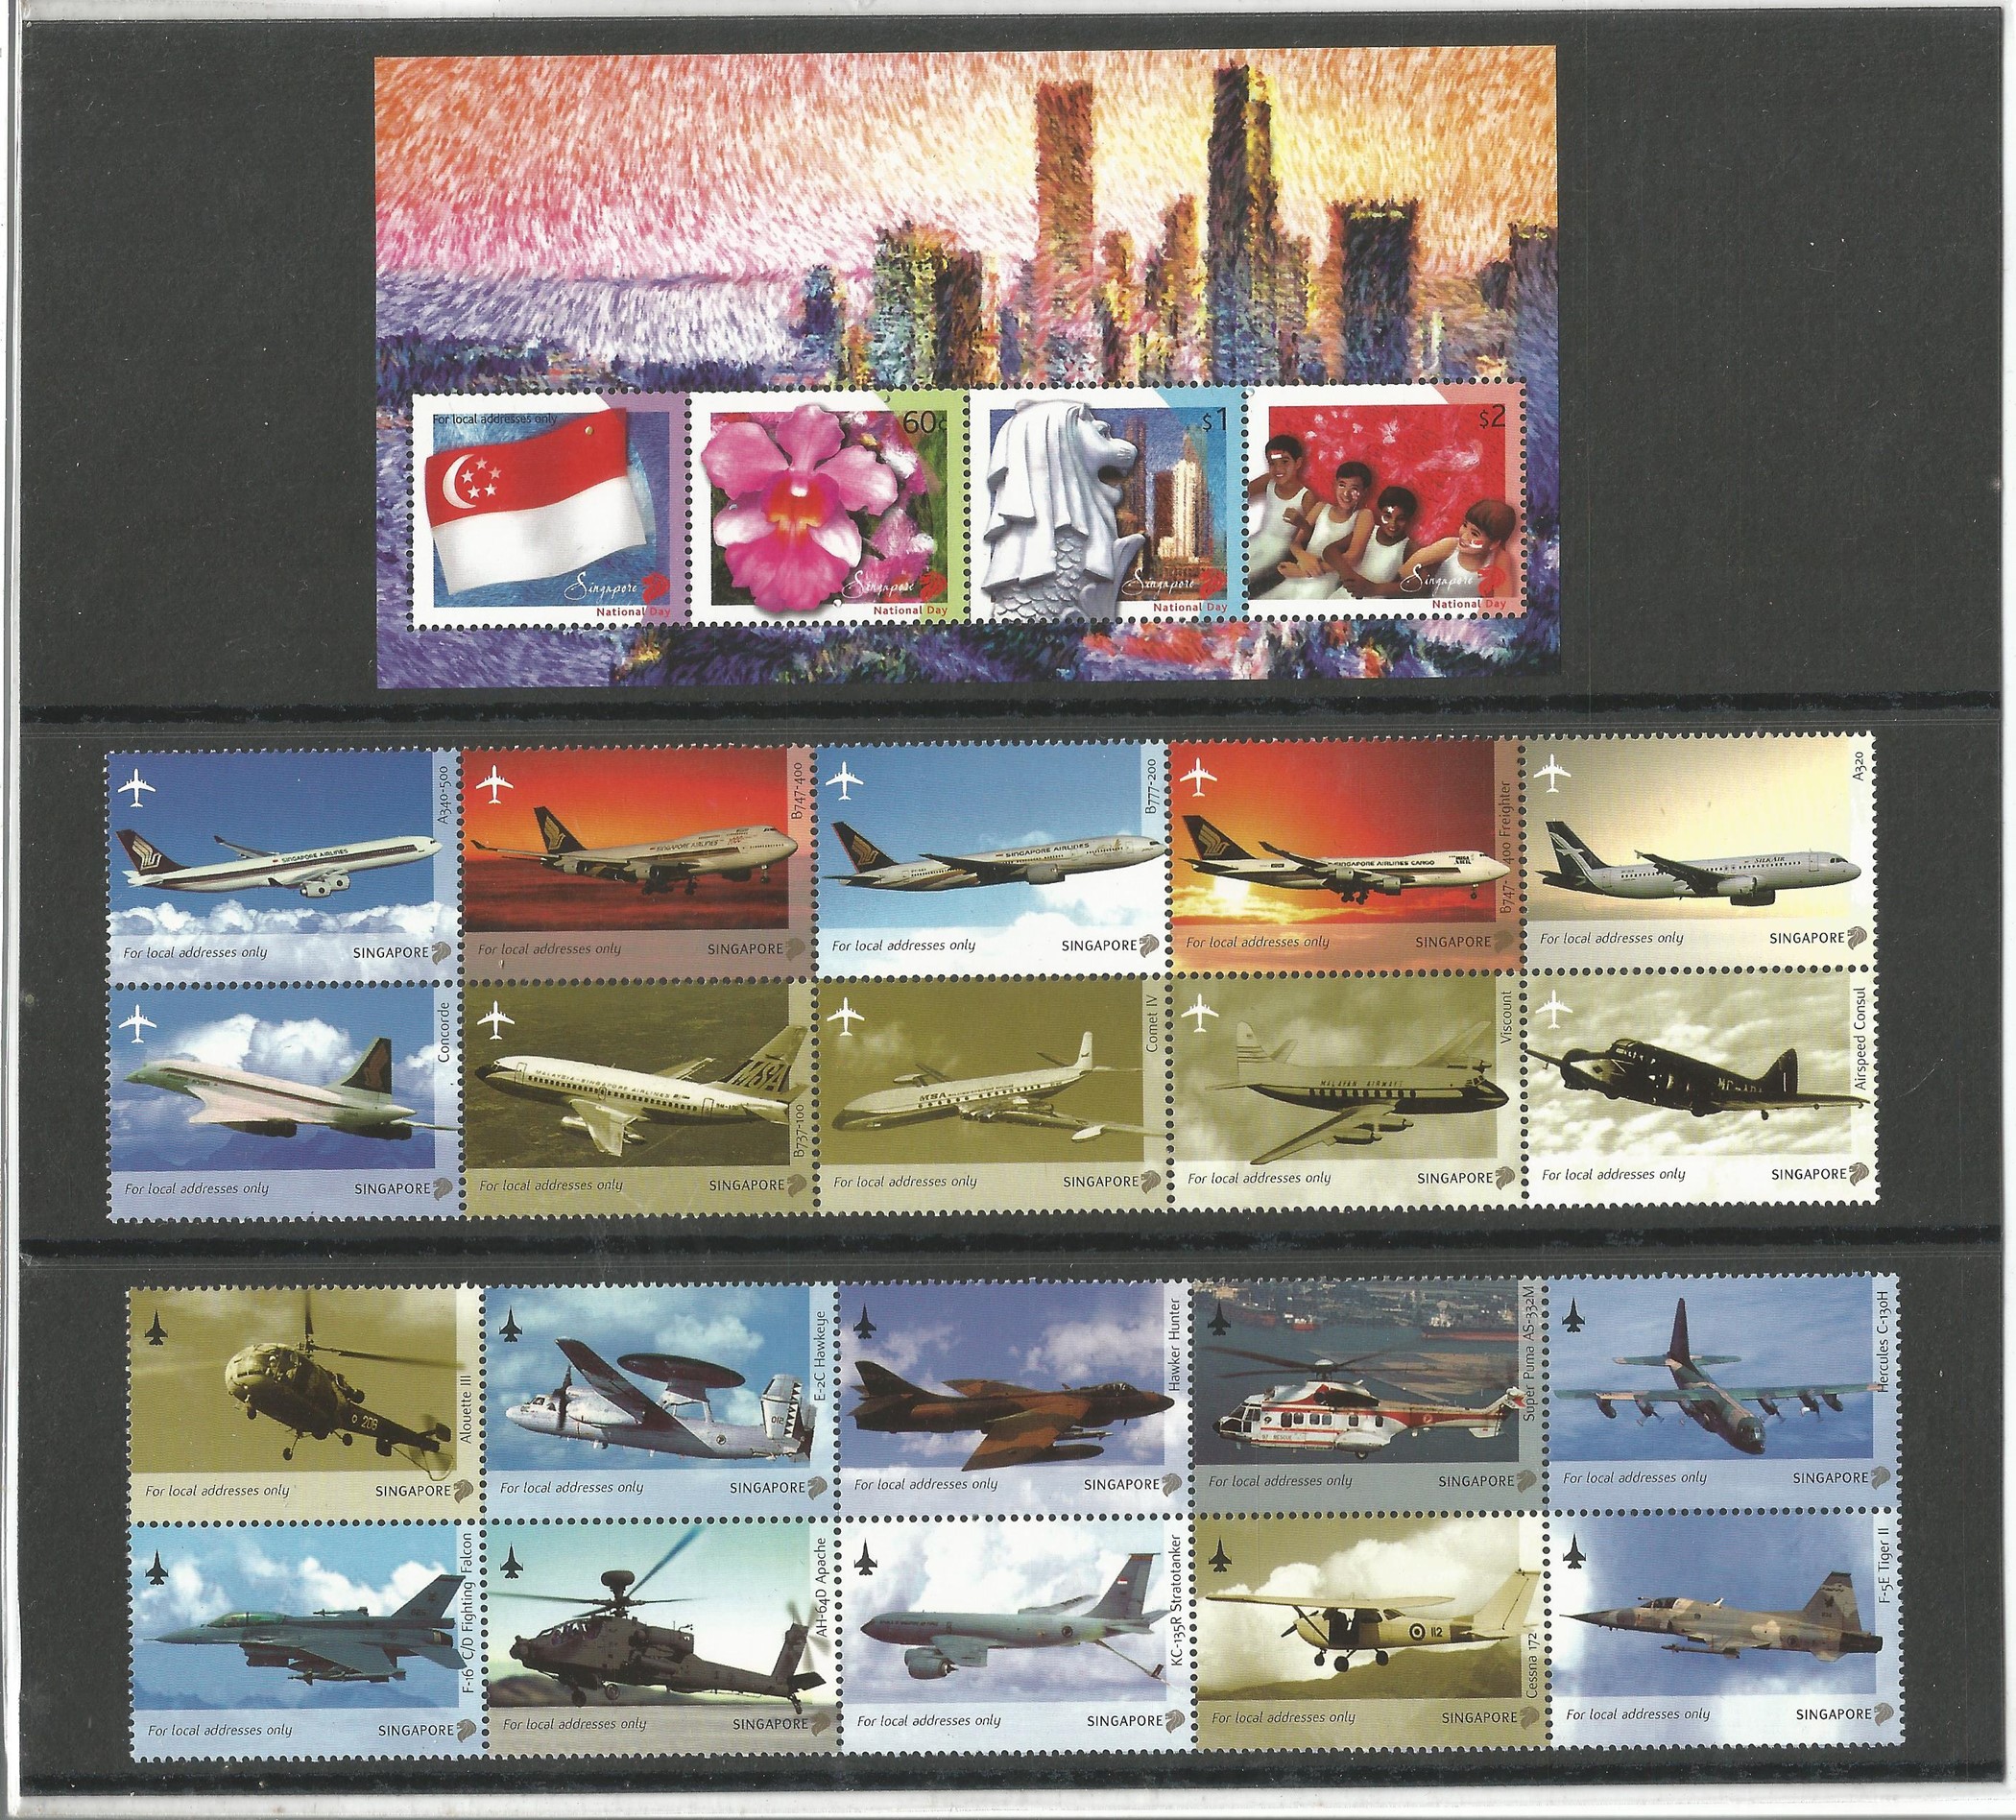 Singapore 2003 presentation book of stamps in slipcase. Unmounted mint stamps. Good condition. We